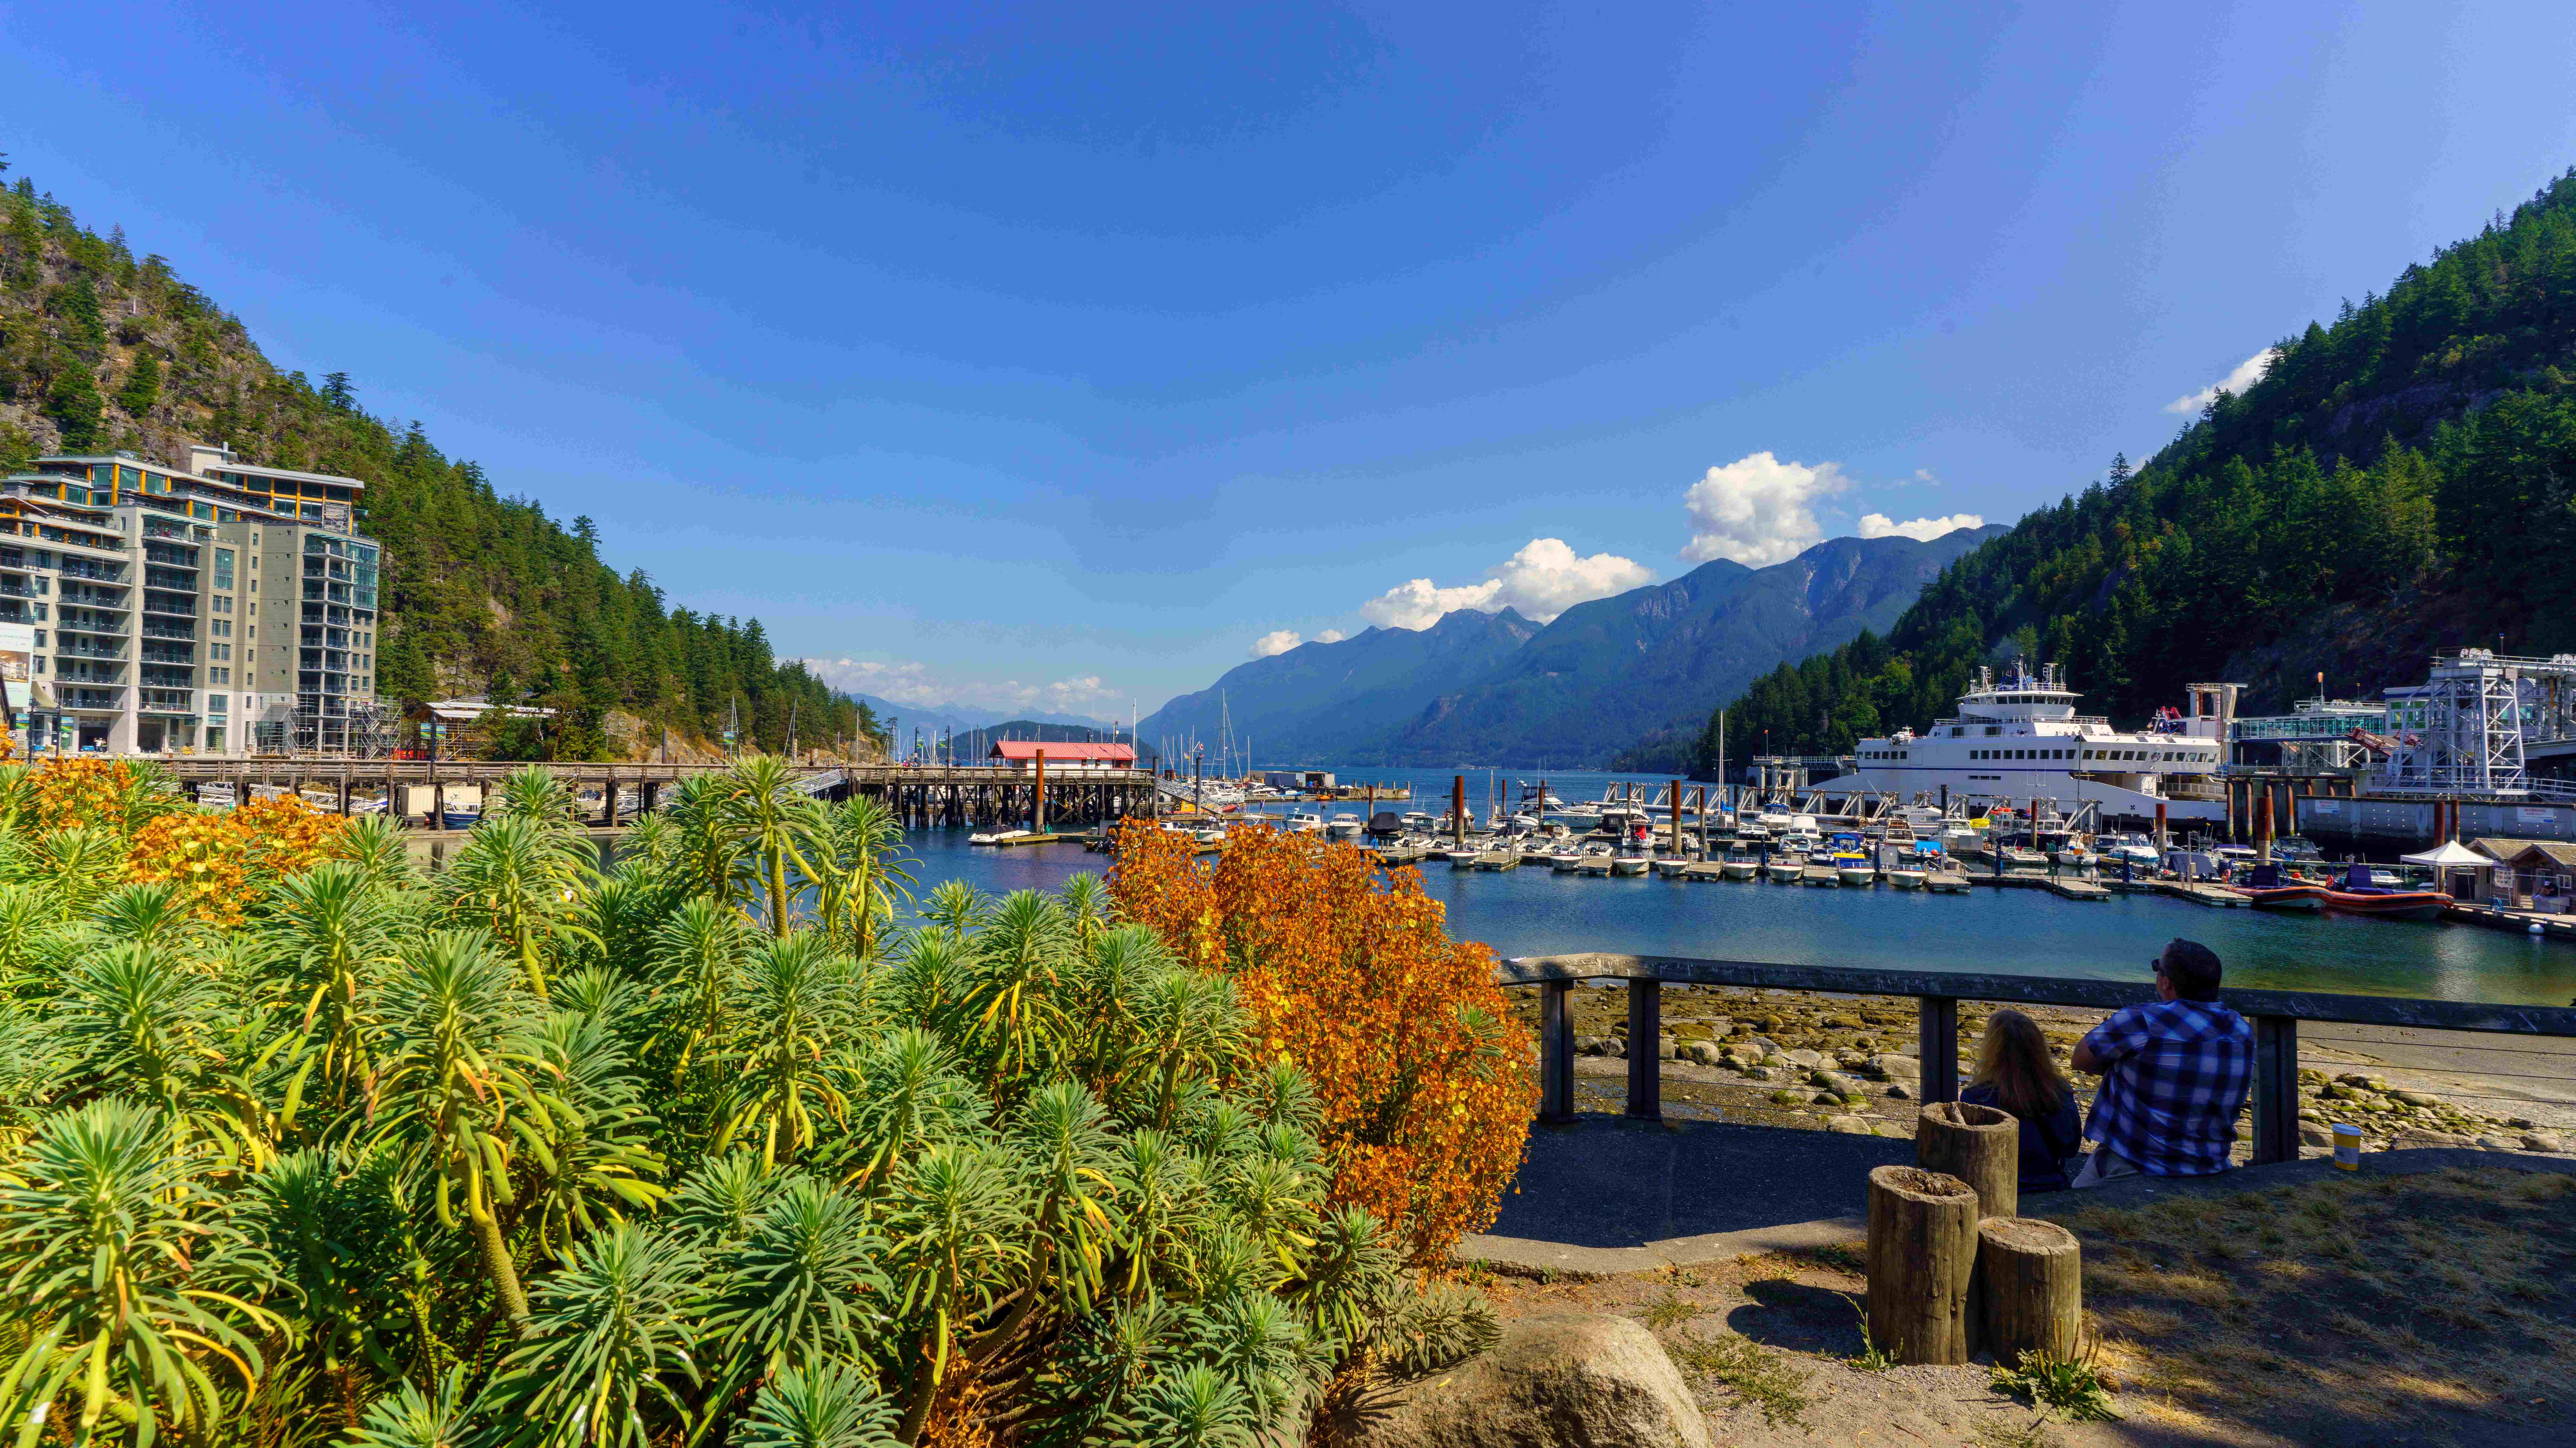 Scenic view of the marina and mountains at Horseshoe Bay